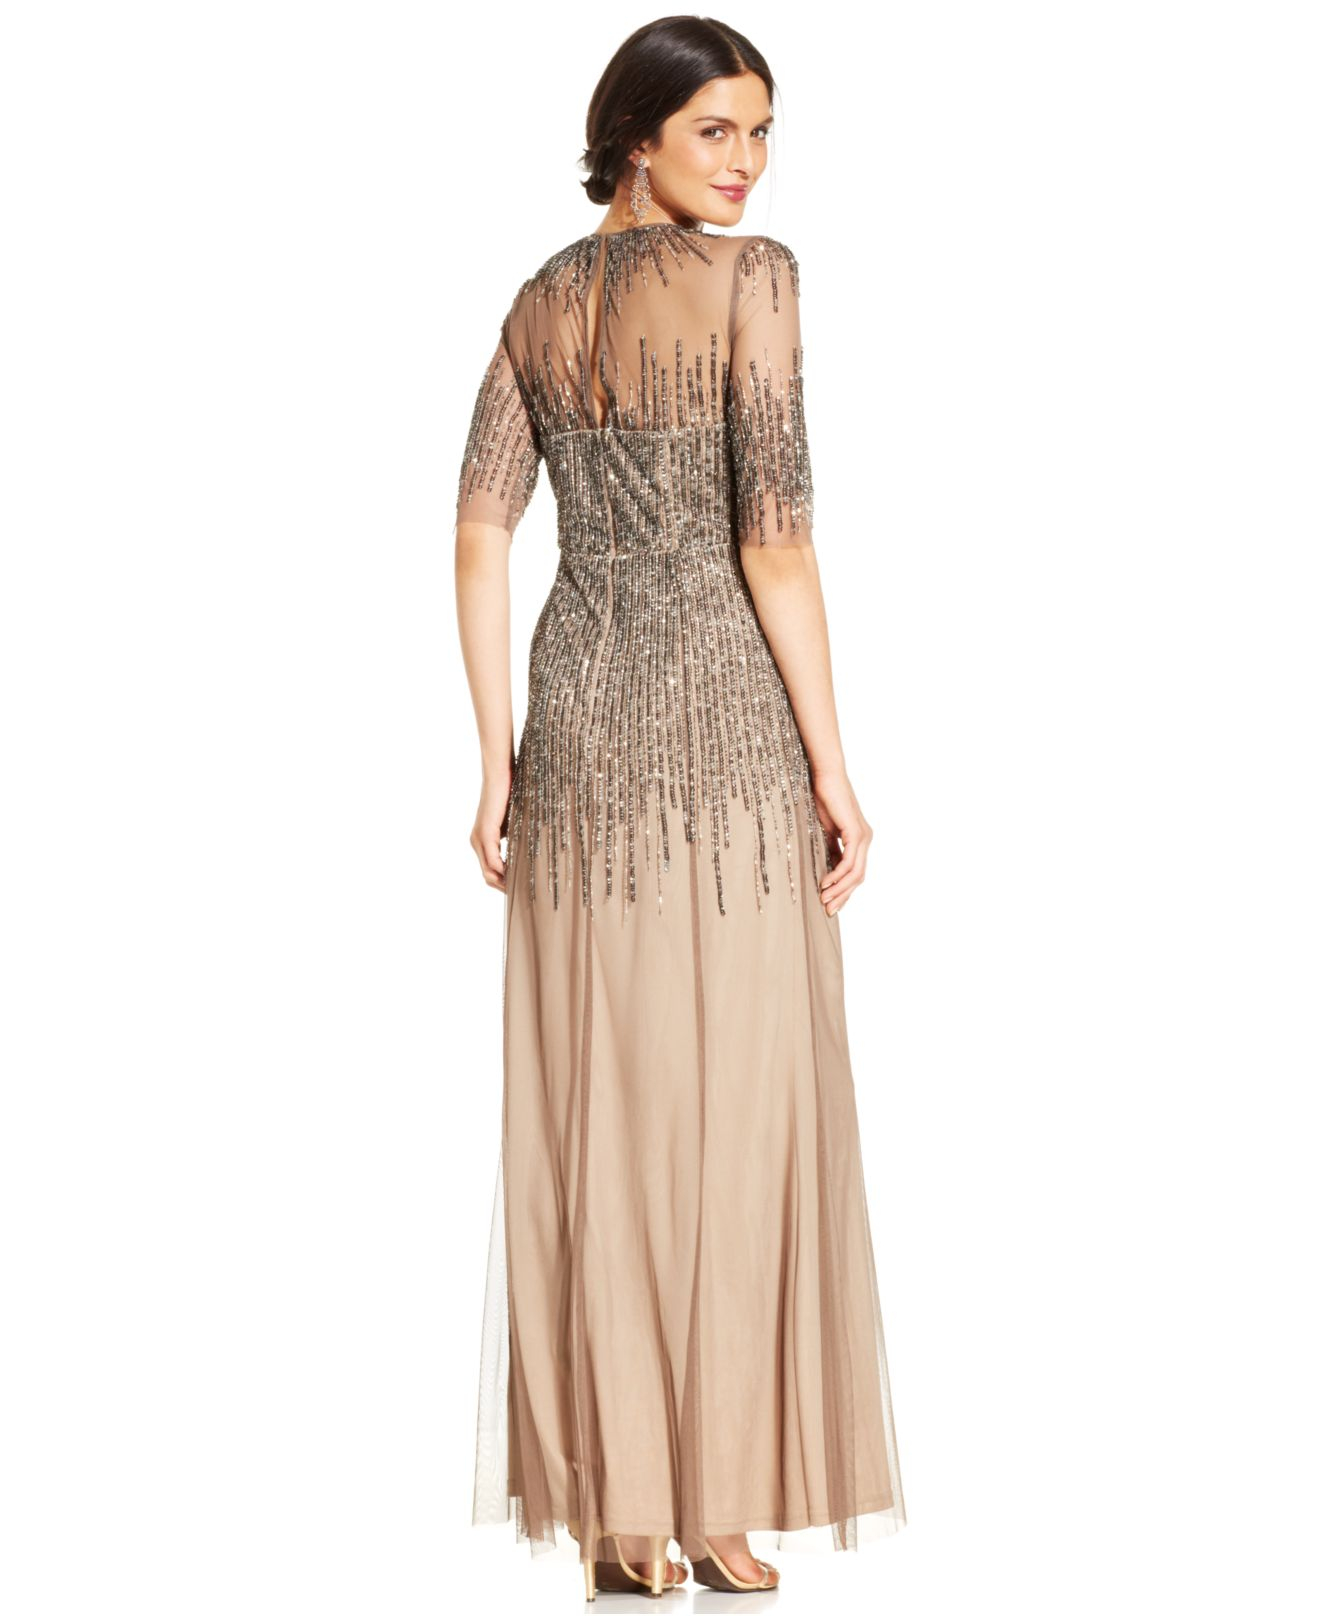 Lyst - Adrianna Papell Elbow-sleeve Illusion Embellished Gown in Gray